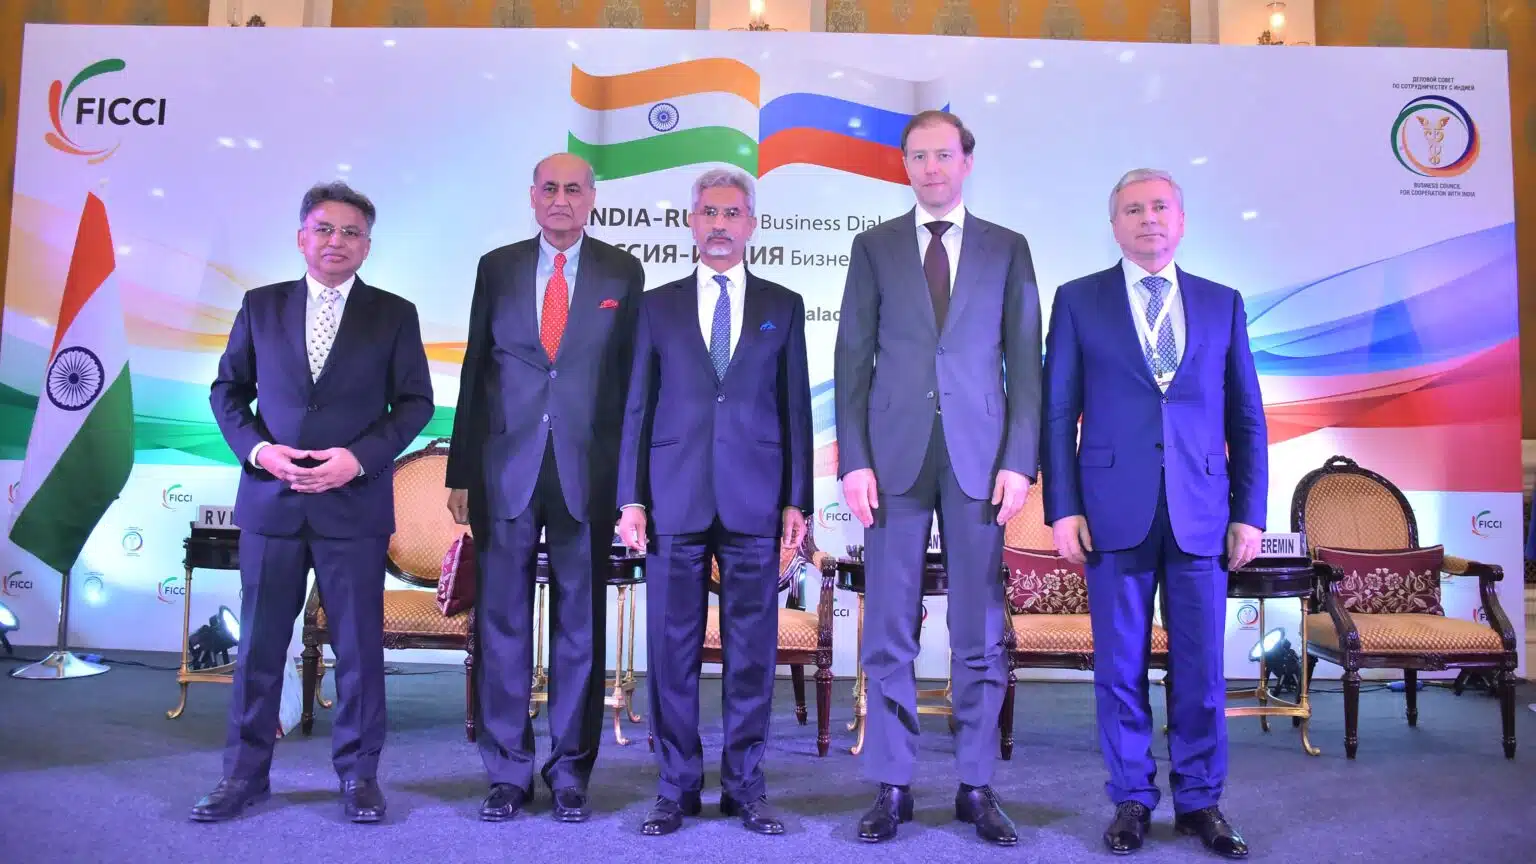 Russia-India trade talk hosted by FICCI